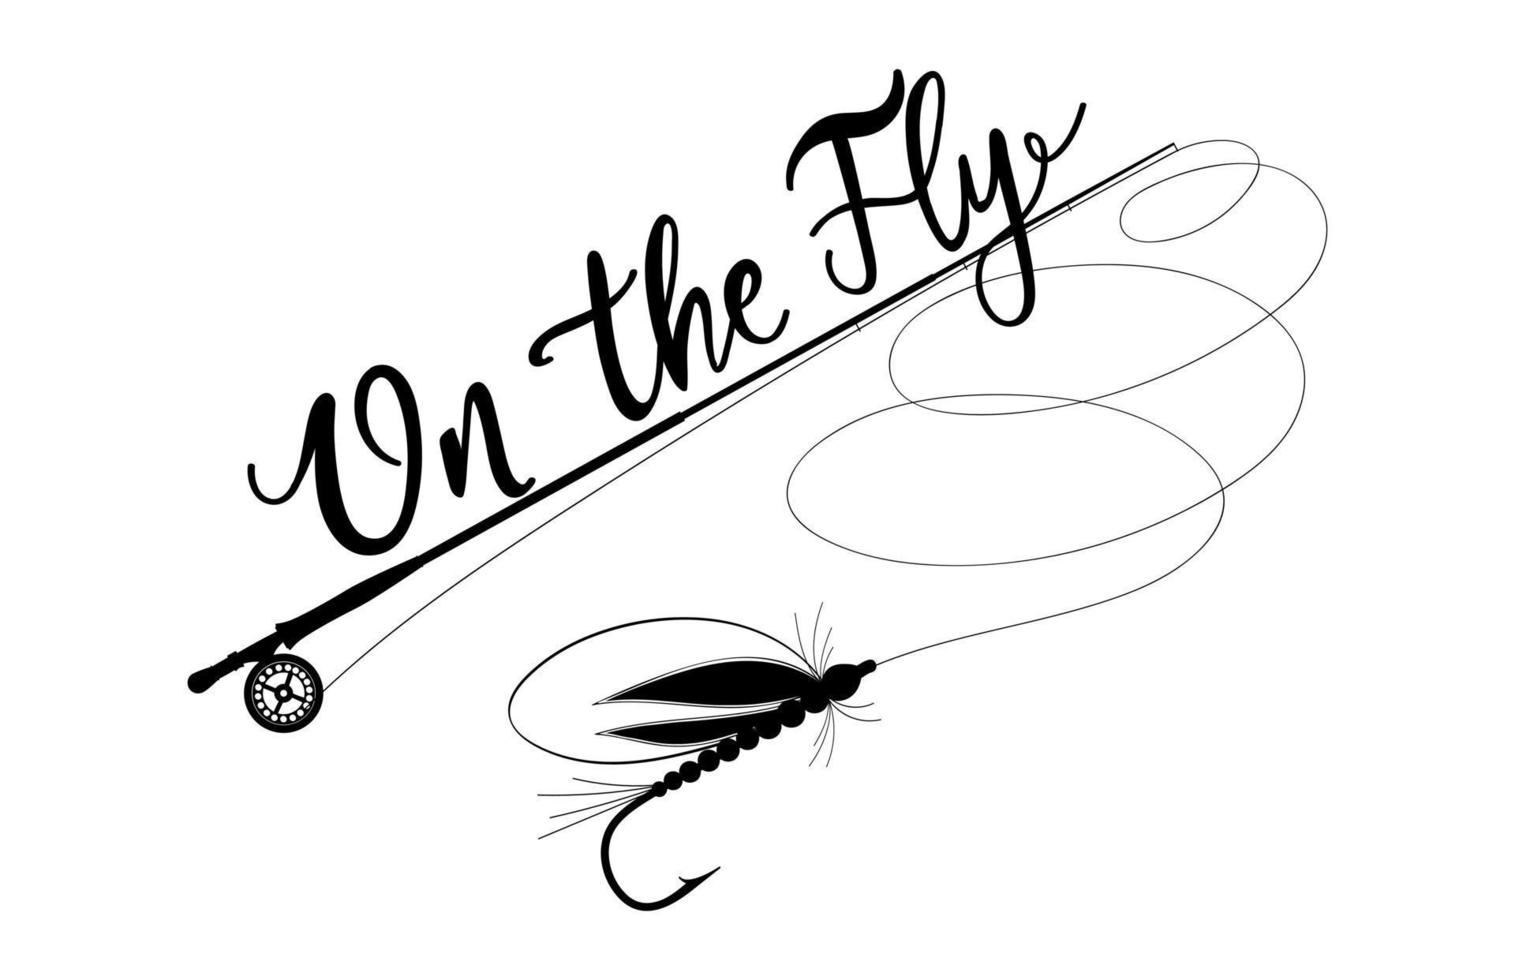 Fly Fishing Lure Vector Art, Icons, and Graphics for Free Download